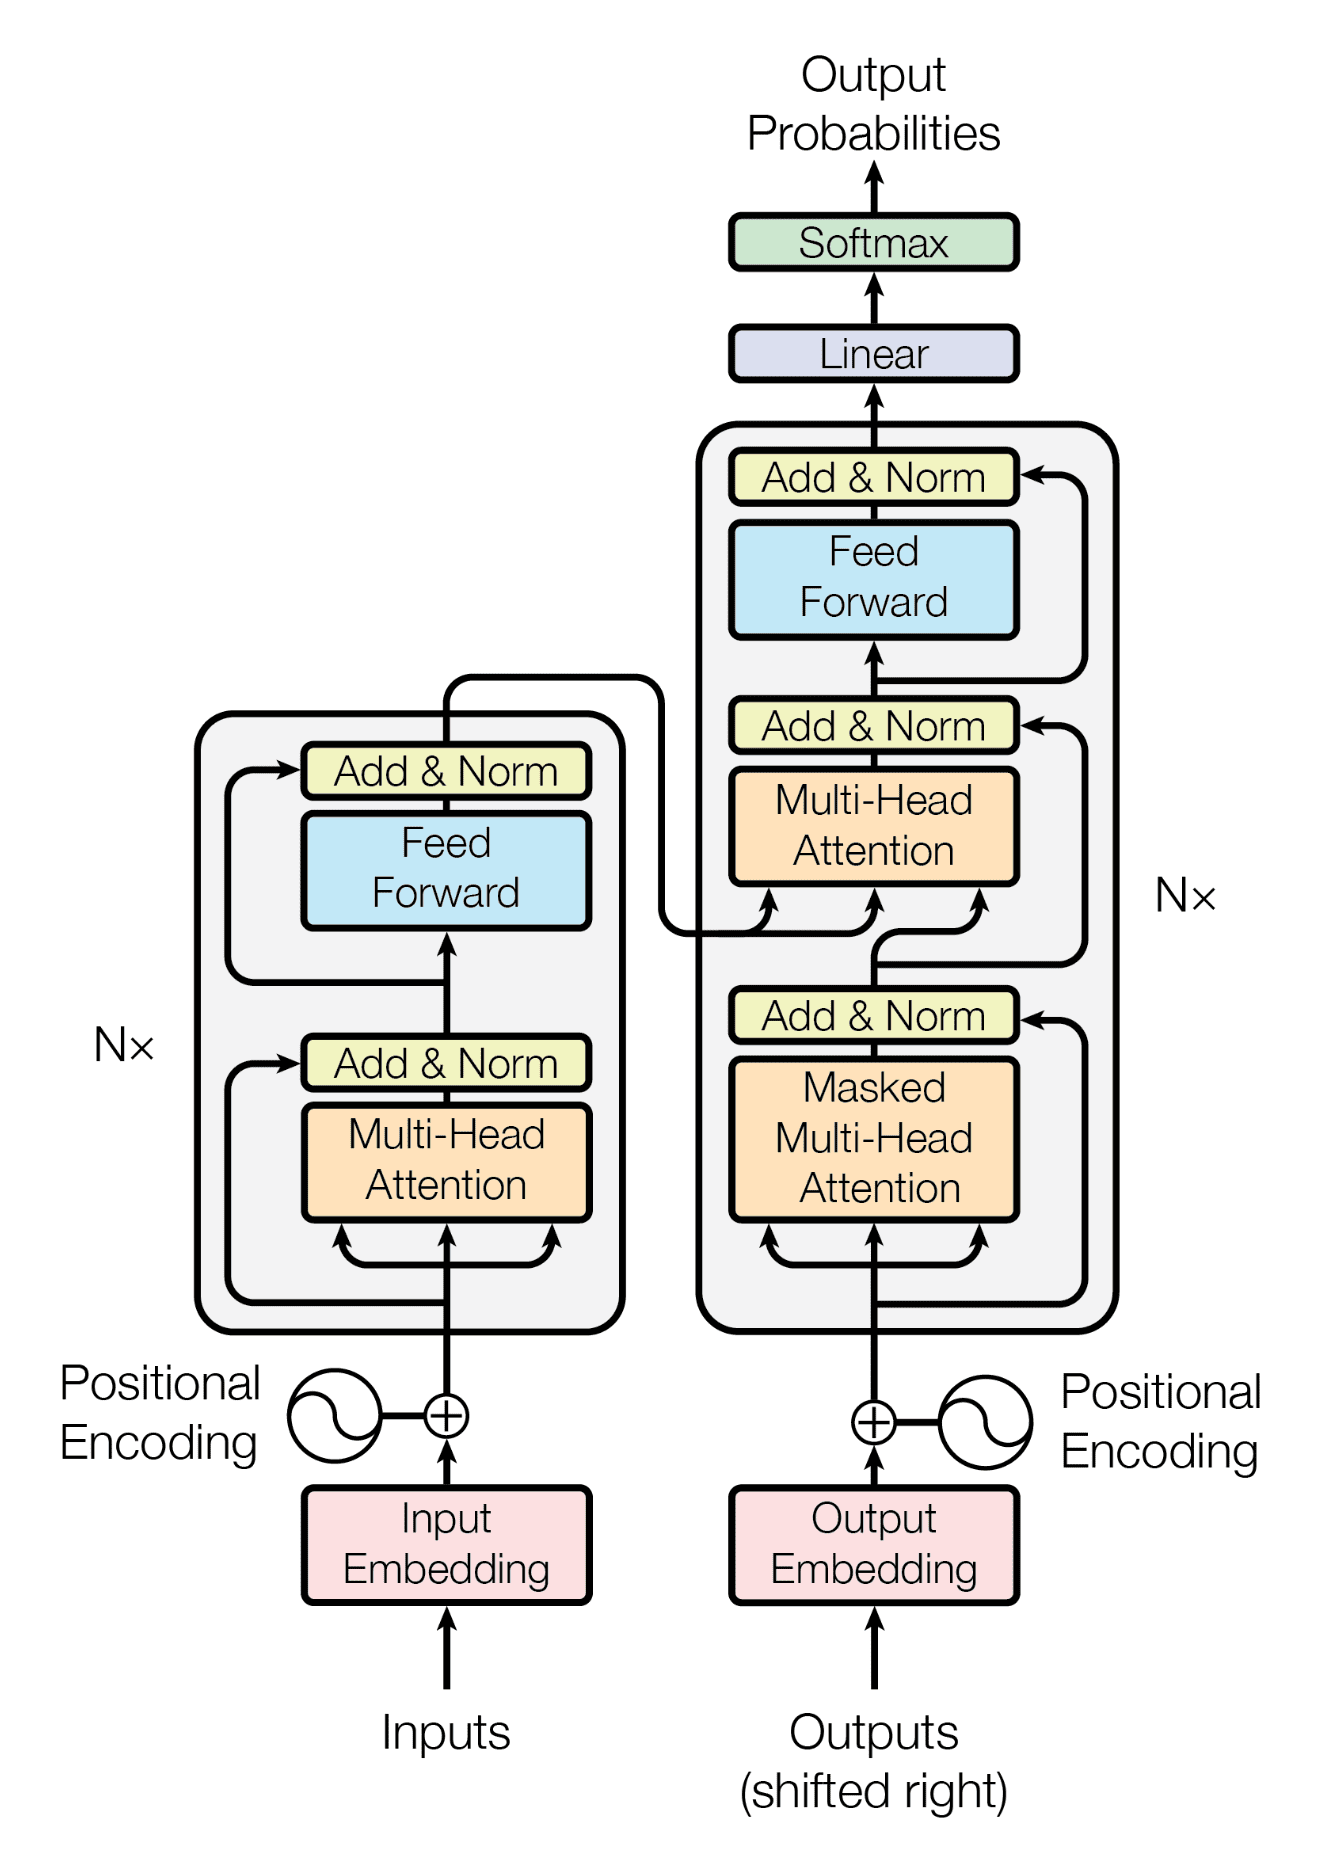 Reference architecture